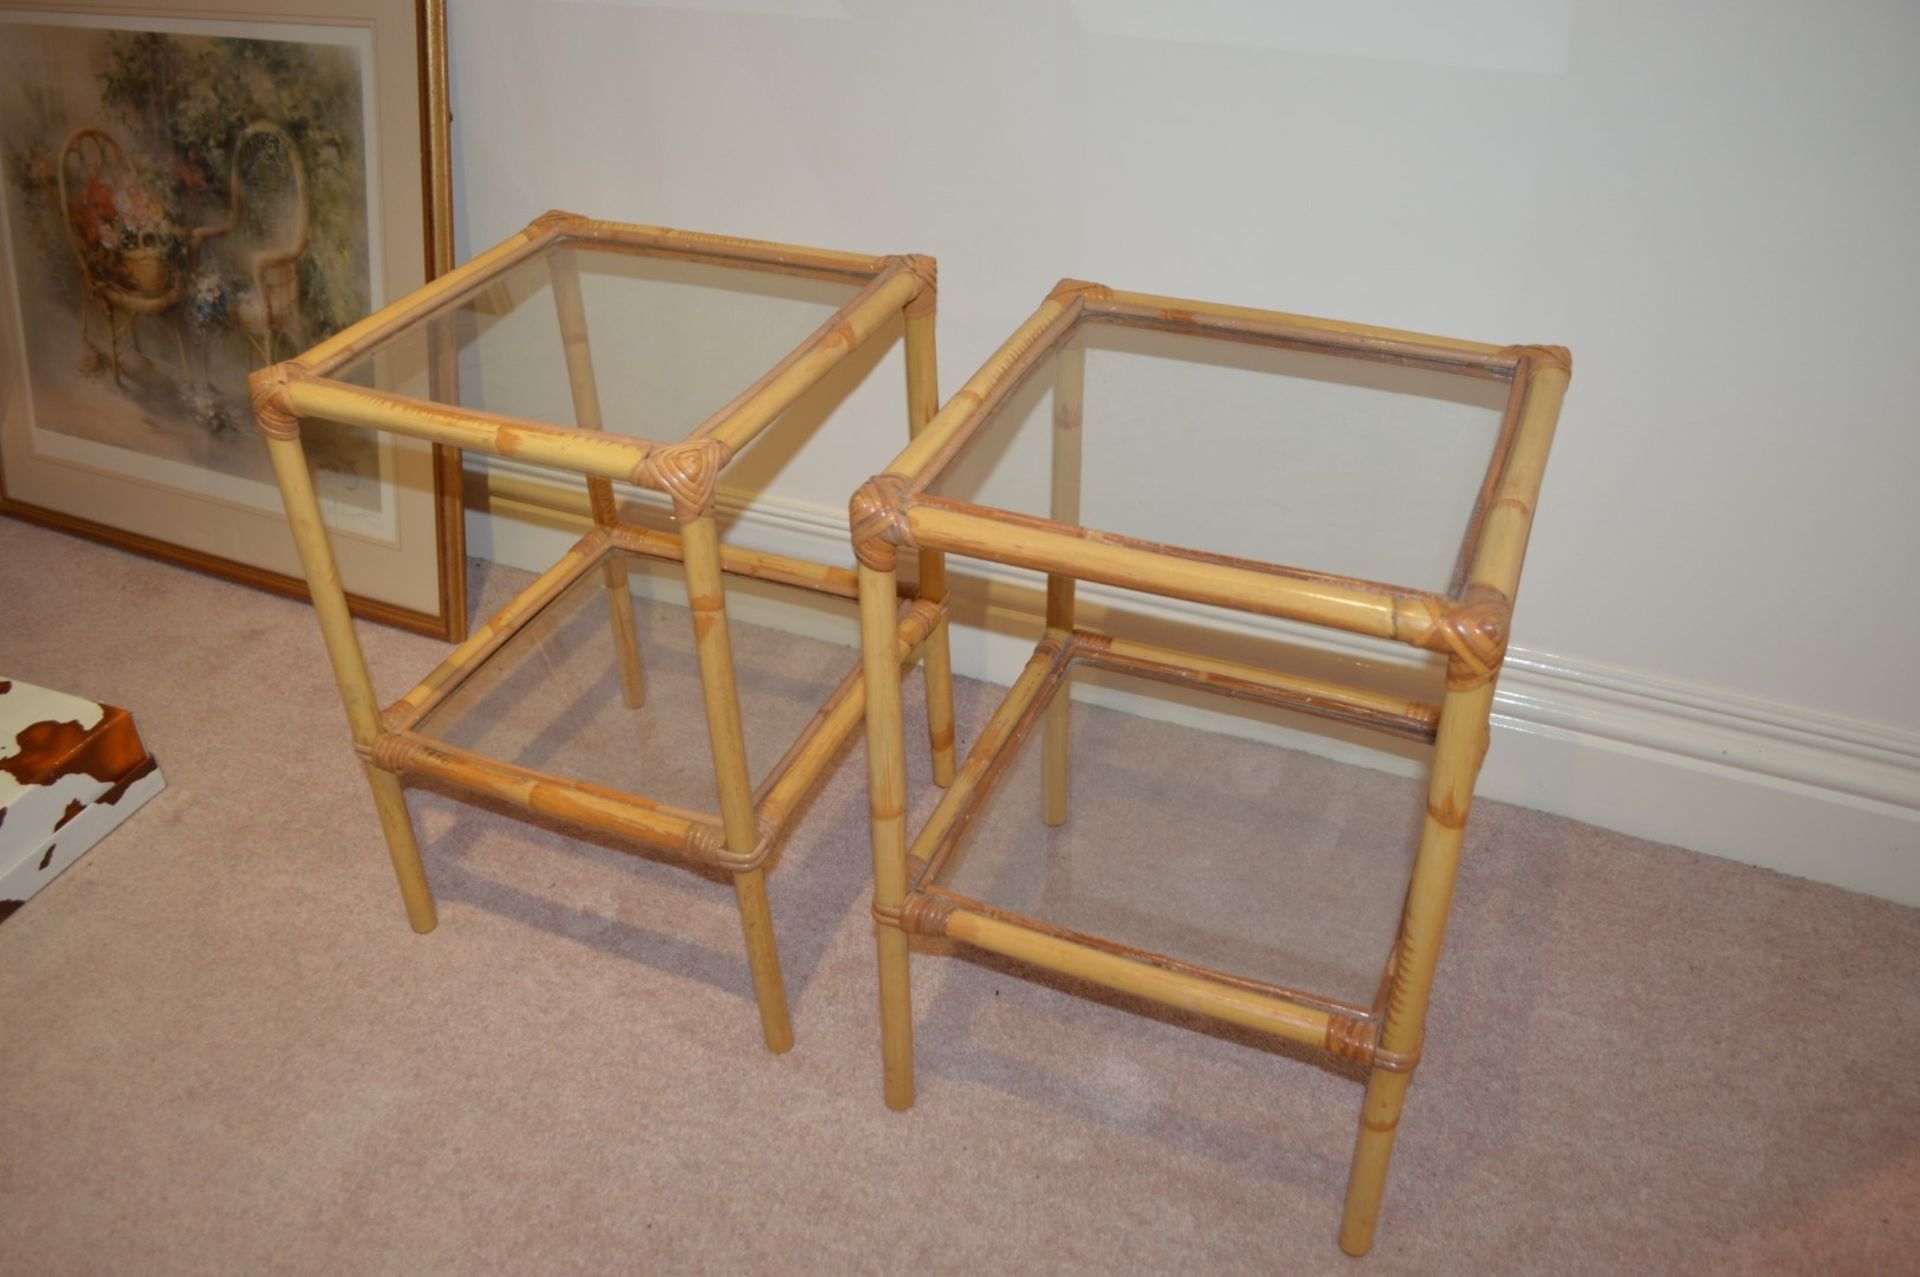 2 x Bamboo Glass Side Table - CL368 - Bowdon WA14 - NO VAT - Image 4 of 5